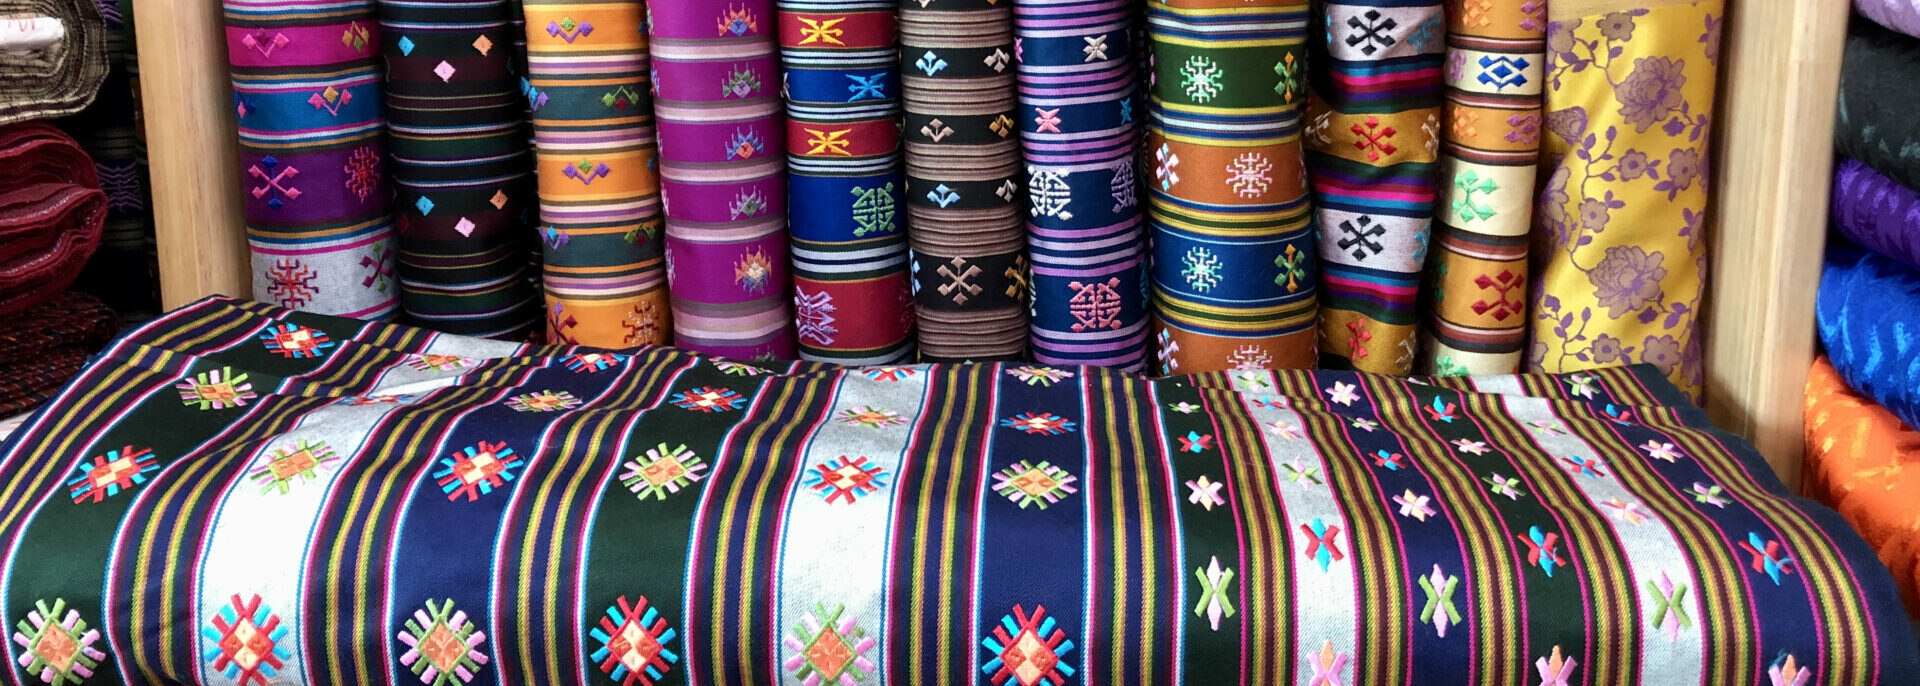 Factory-woven kira dress cloth with typical motifs.